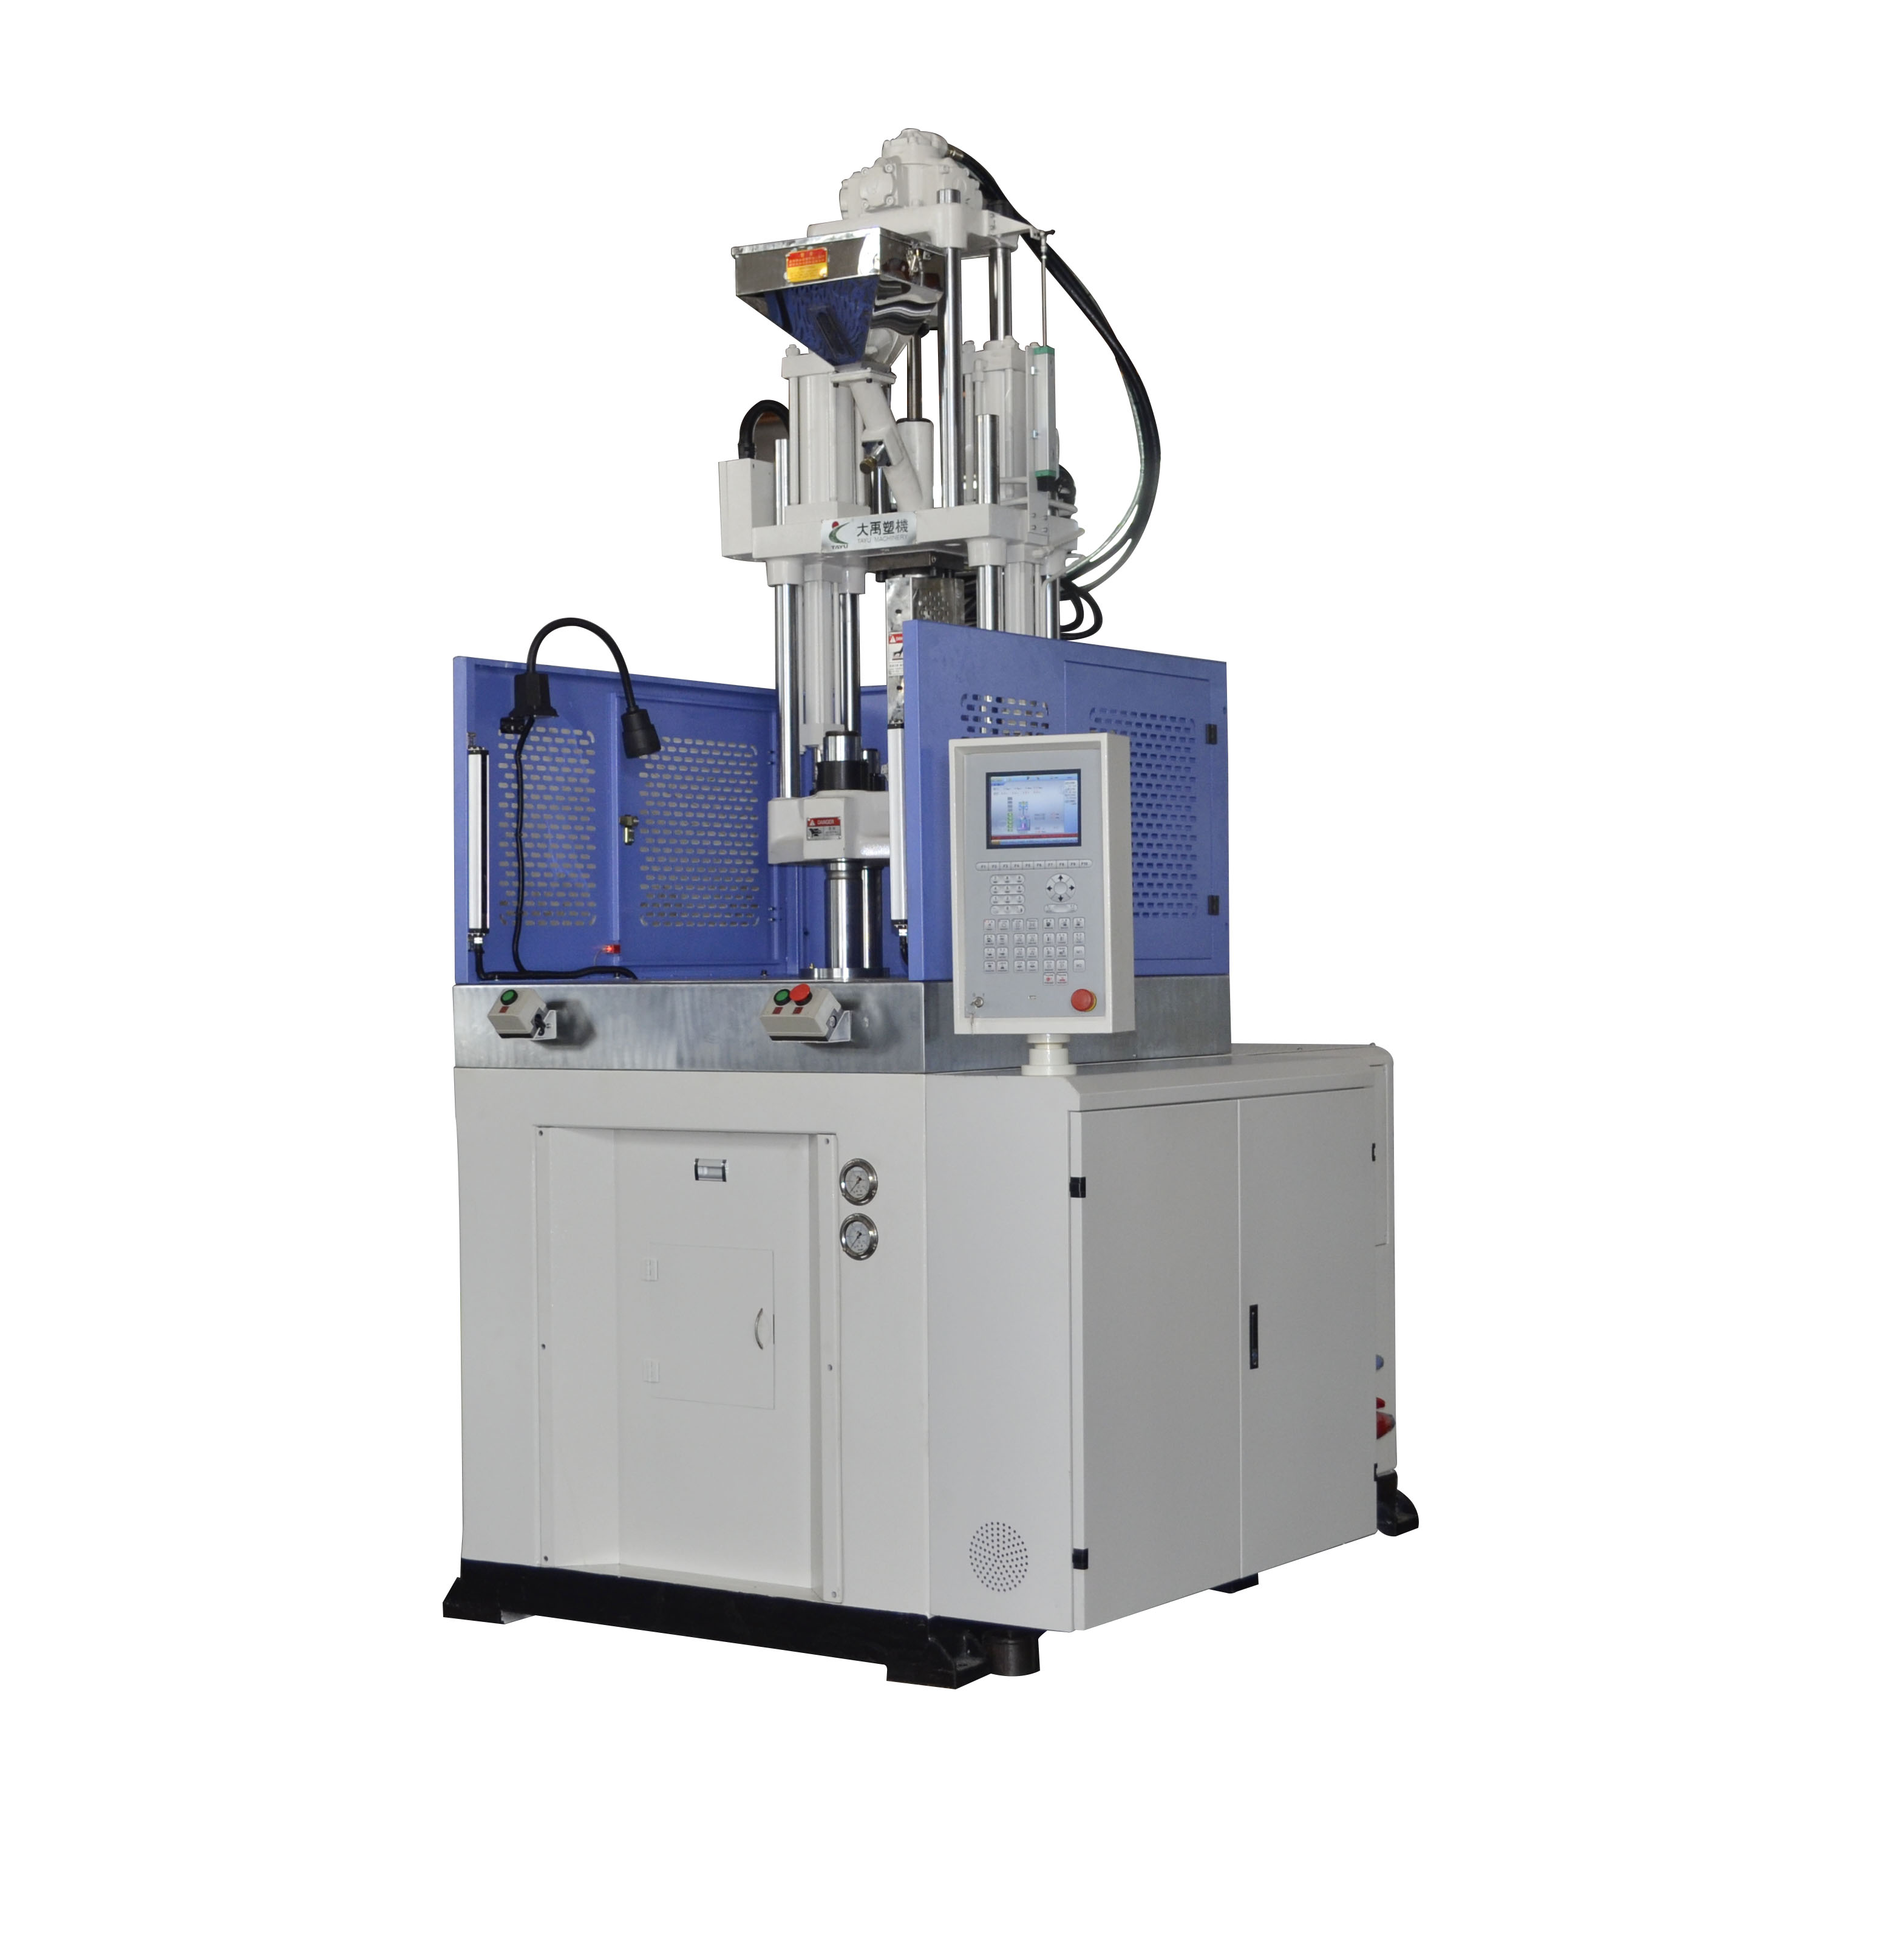 TY-850.2R vertical injection molding machine